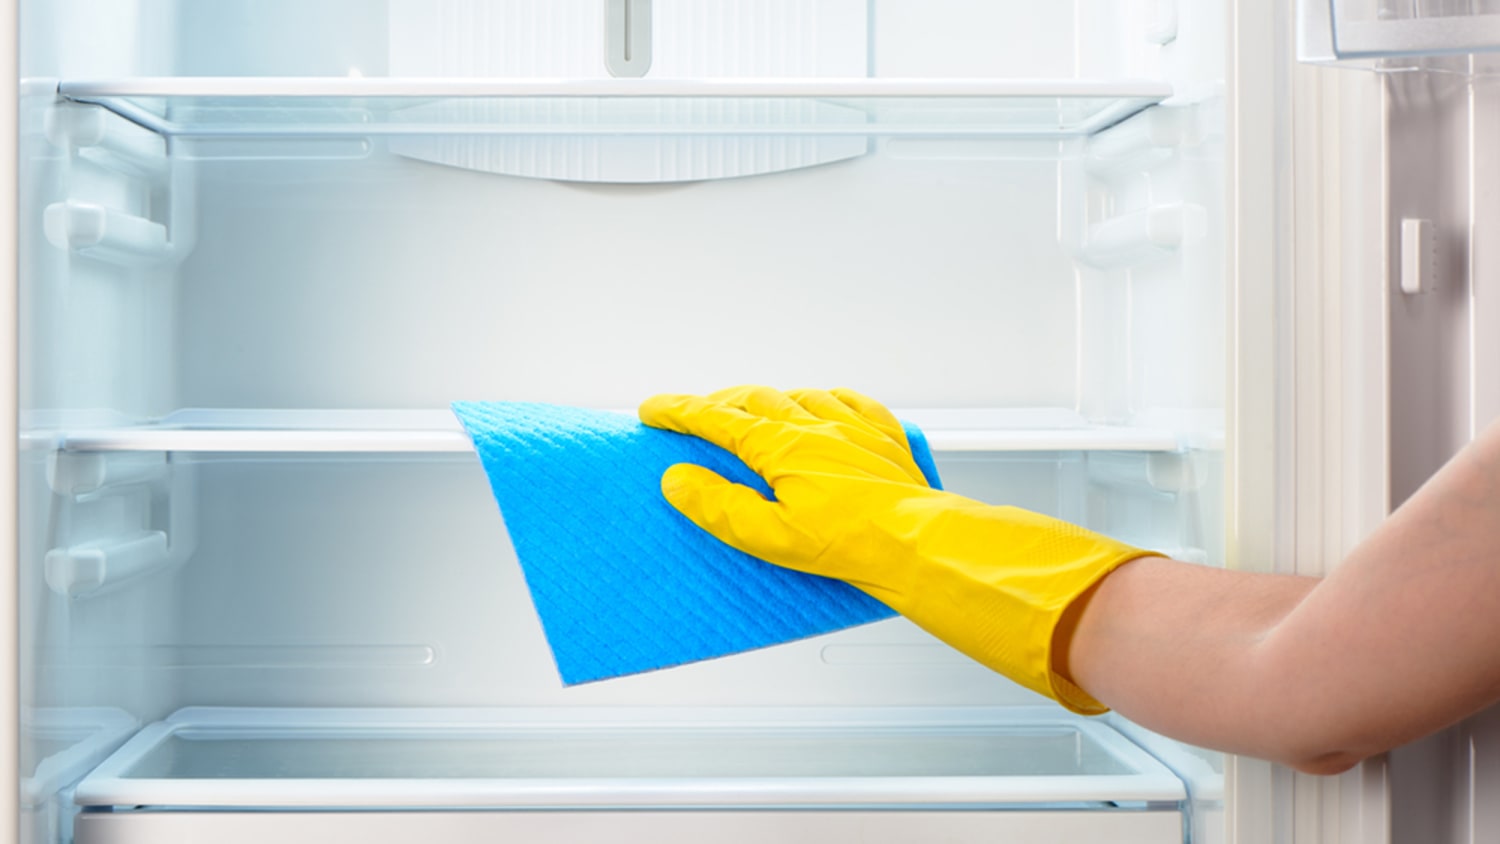 Image result for cleaning the fridge images